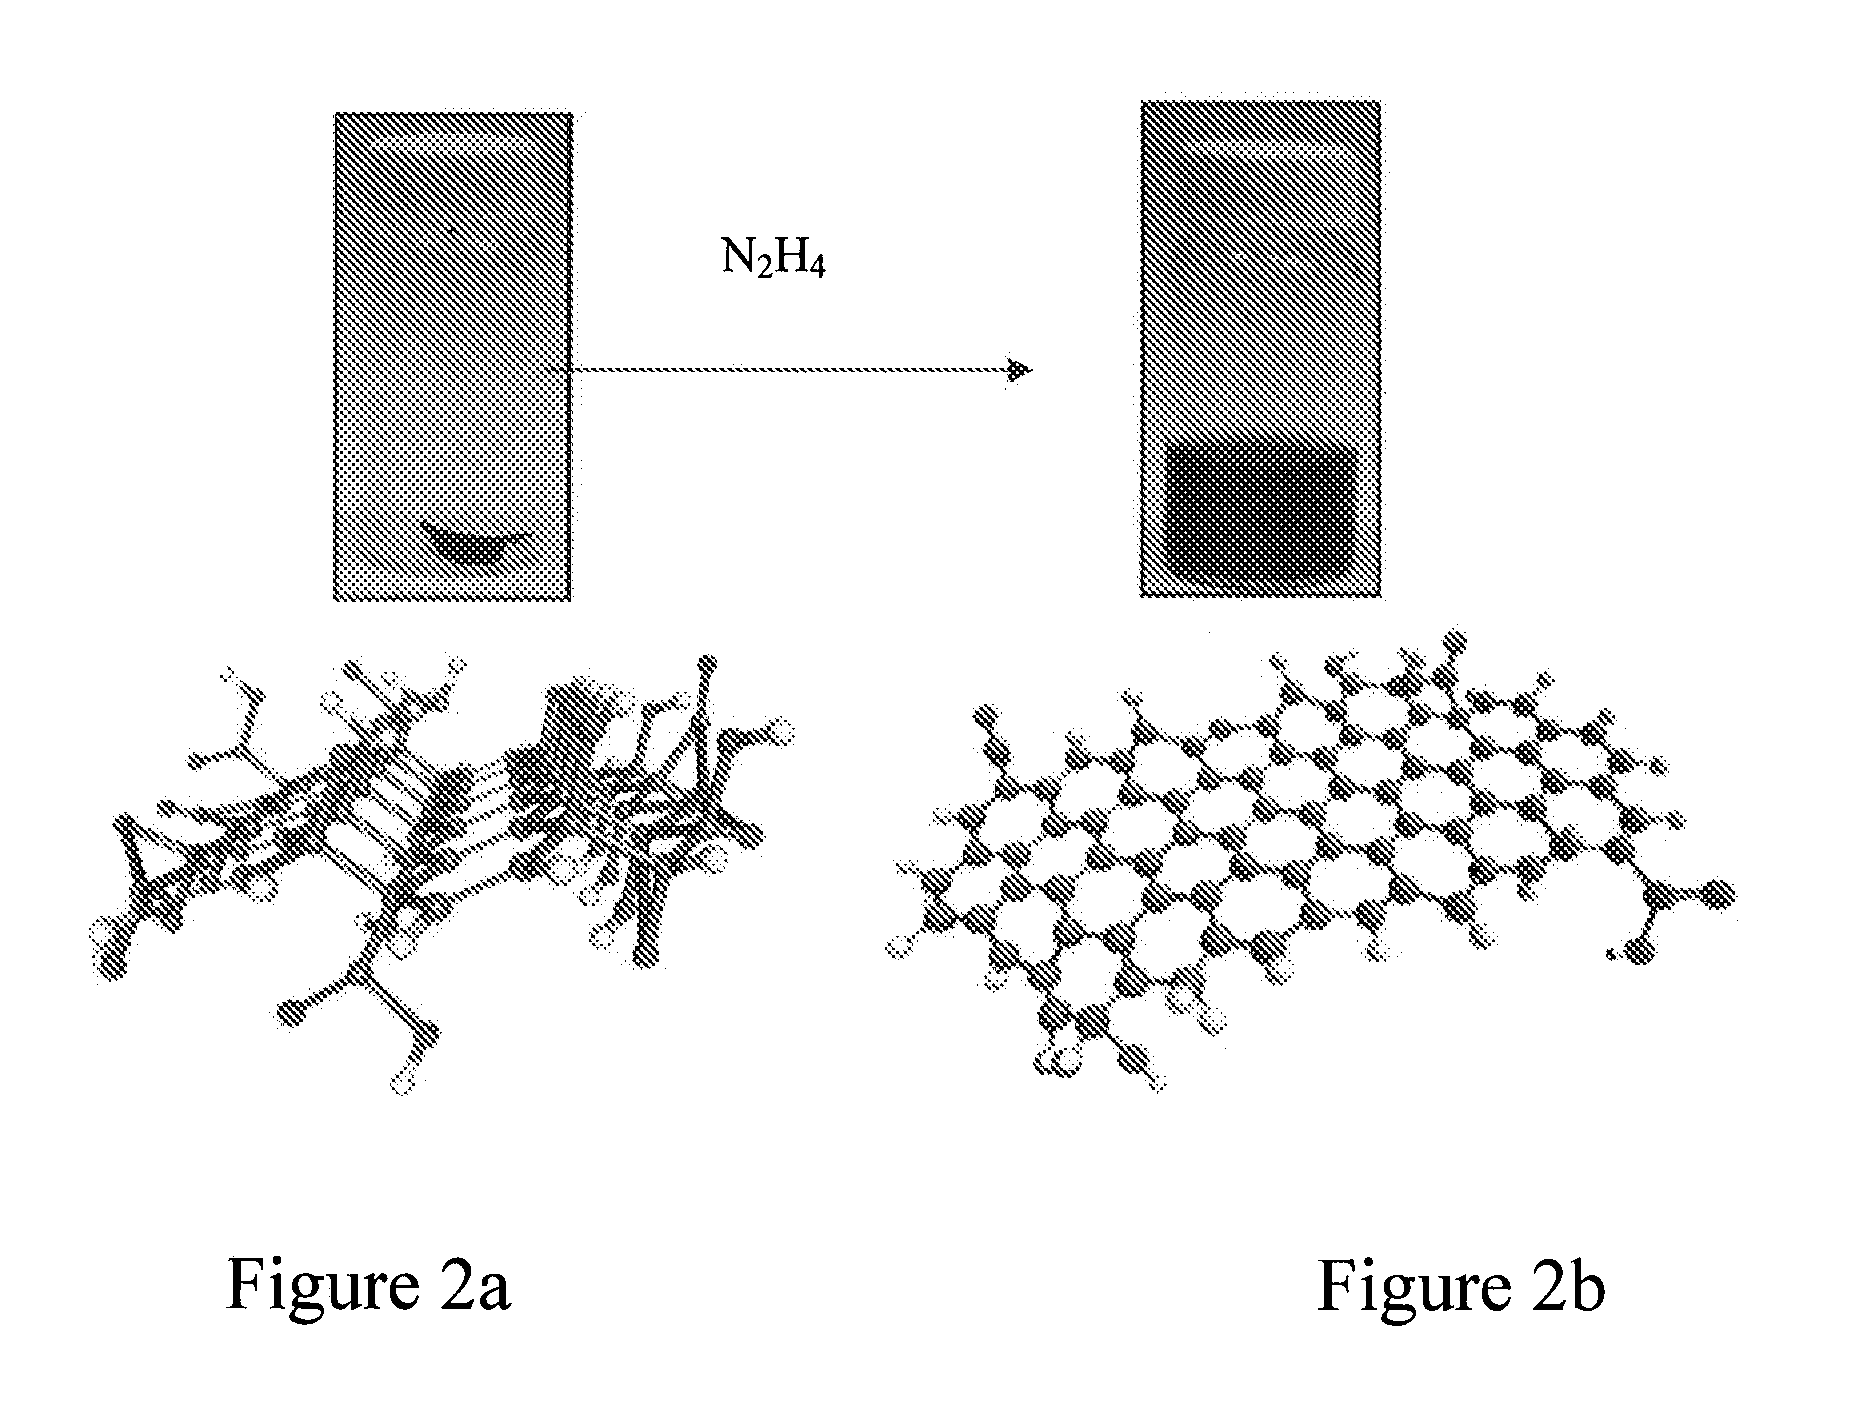 High-throughput solution processing of large scale graphene and device applications